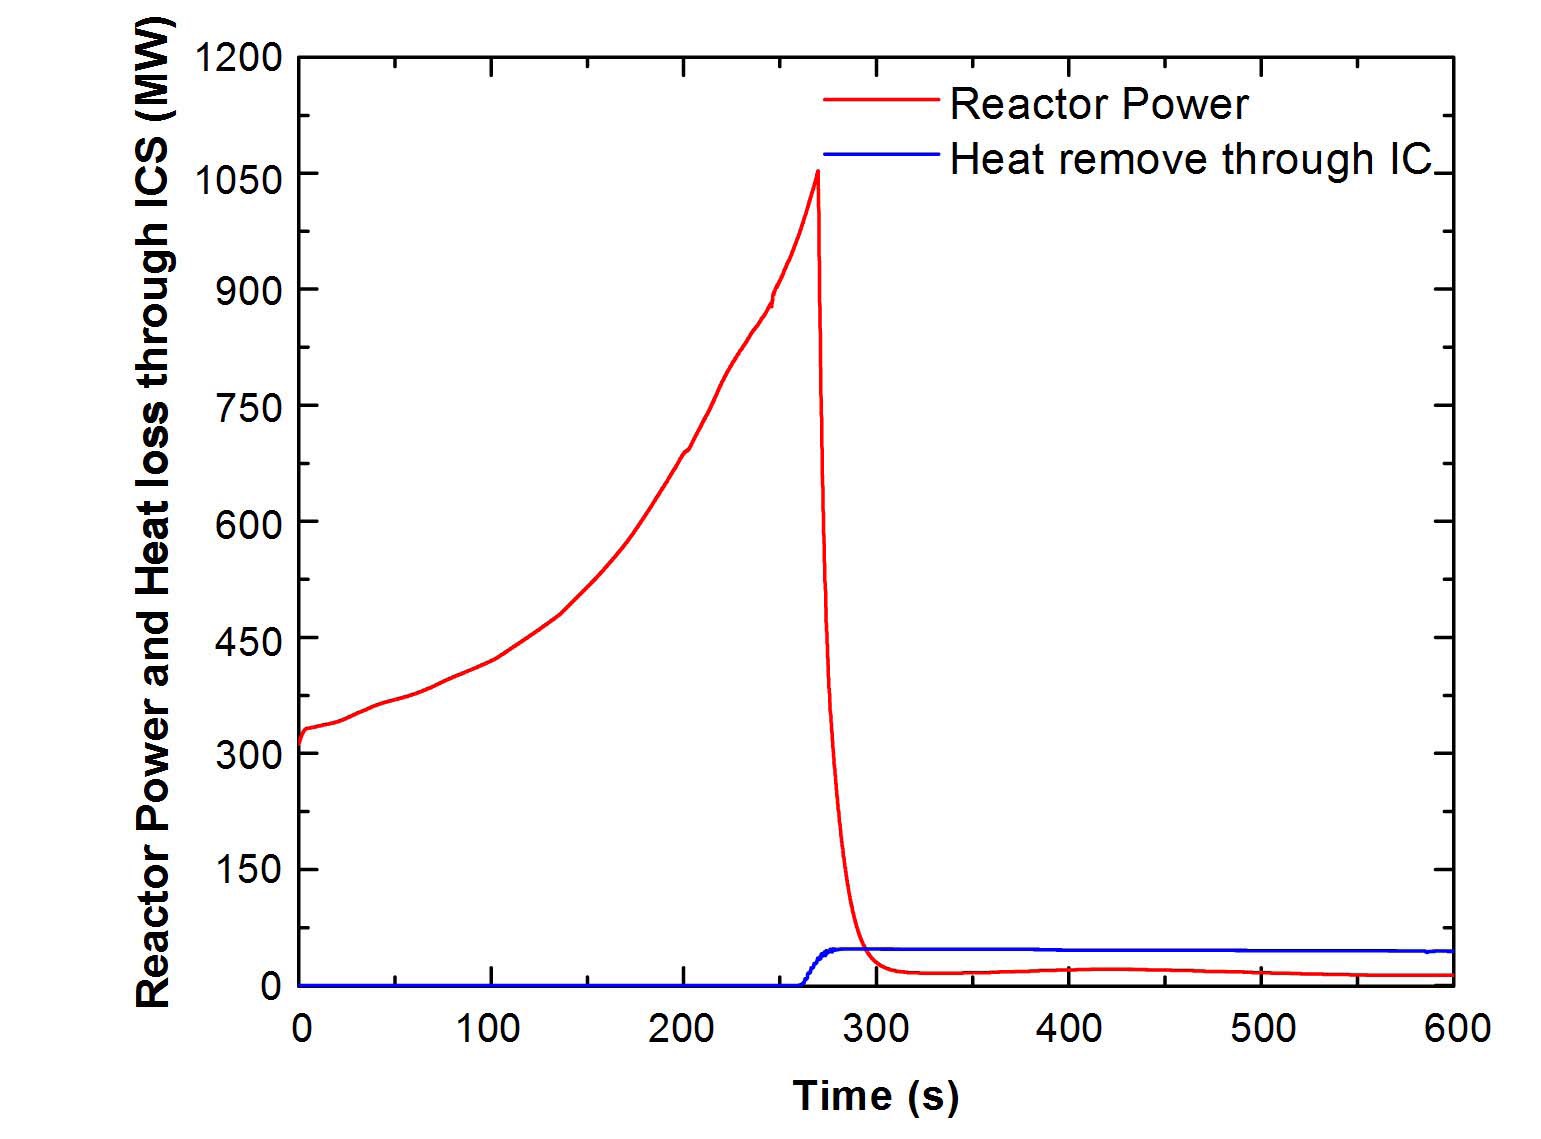 Comparison of Reactor Power and Heat Loss through ICS for Chernobyl-like Accident